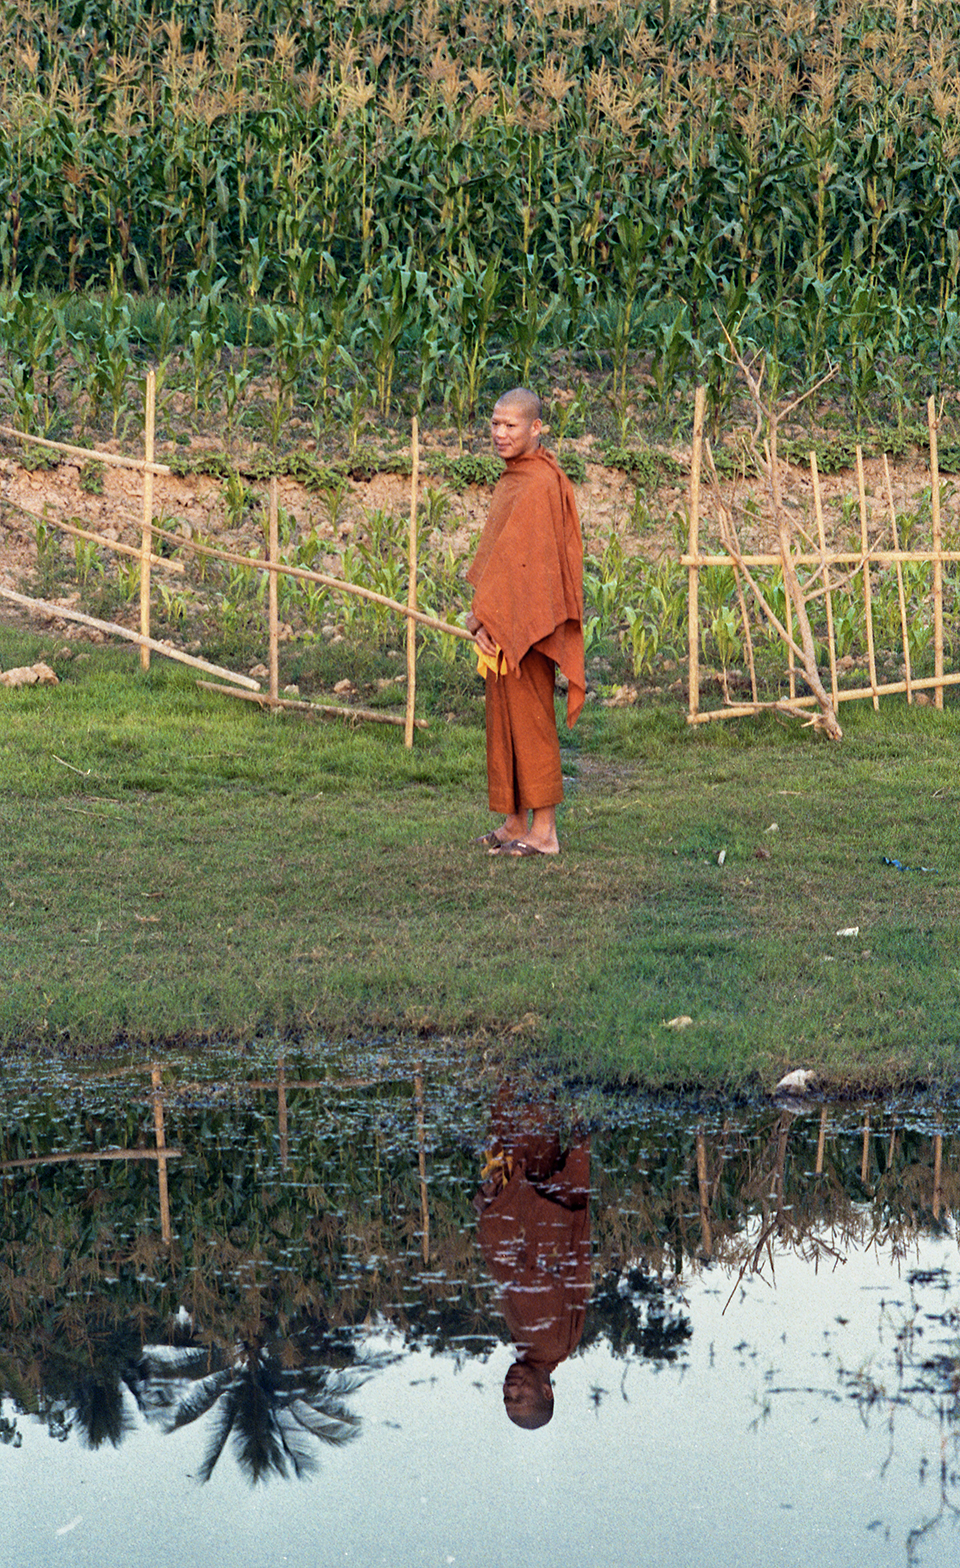 An orange-robed monk stands near crops, Laos